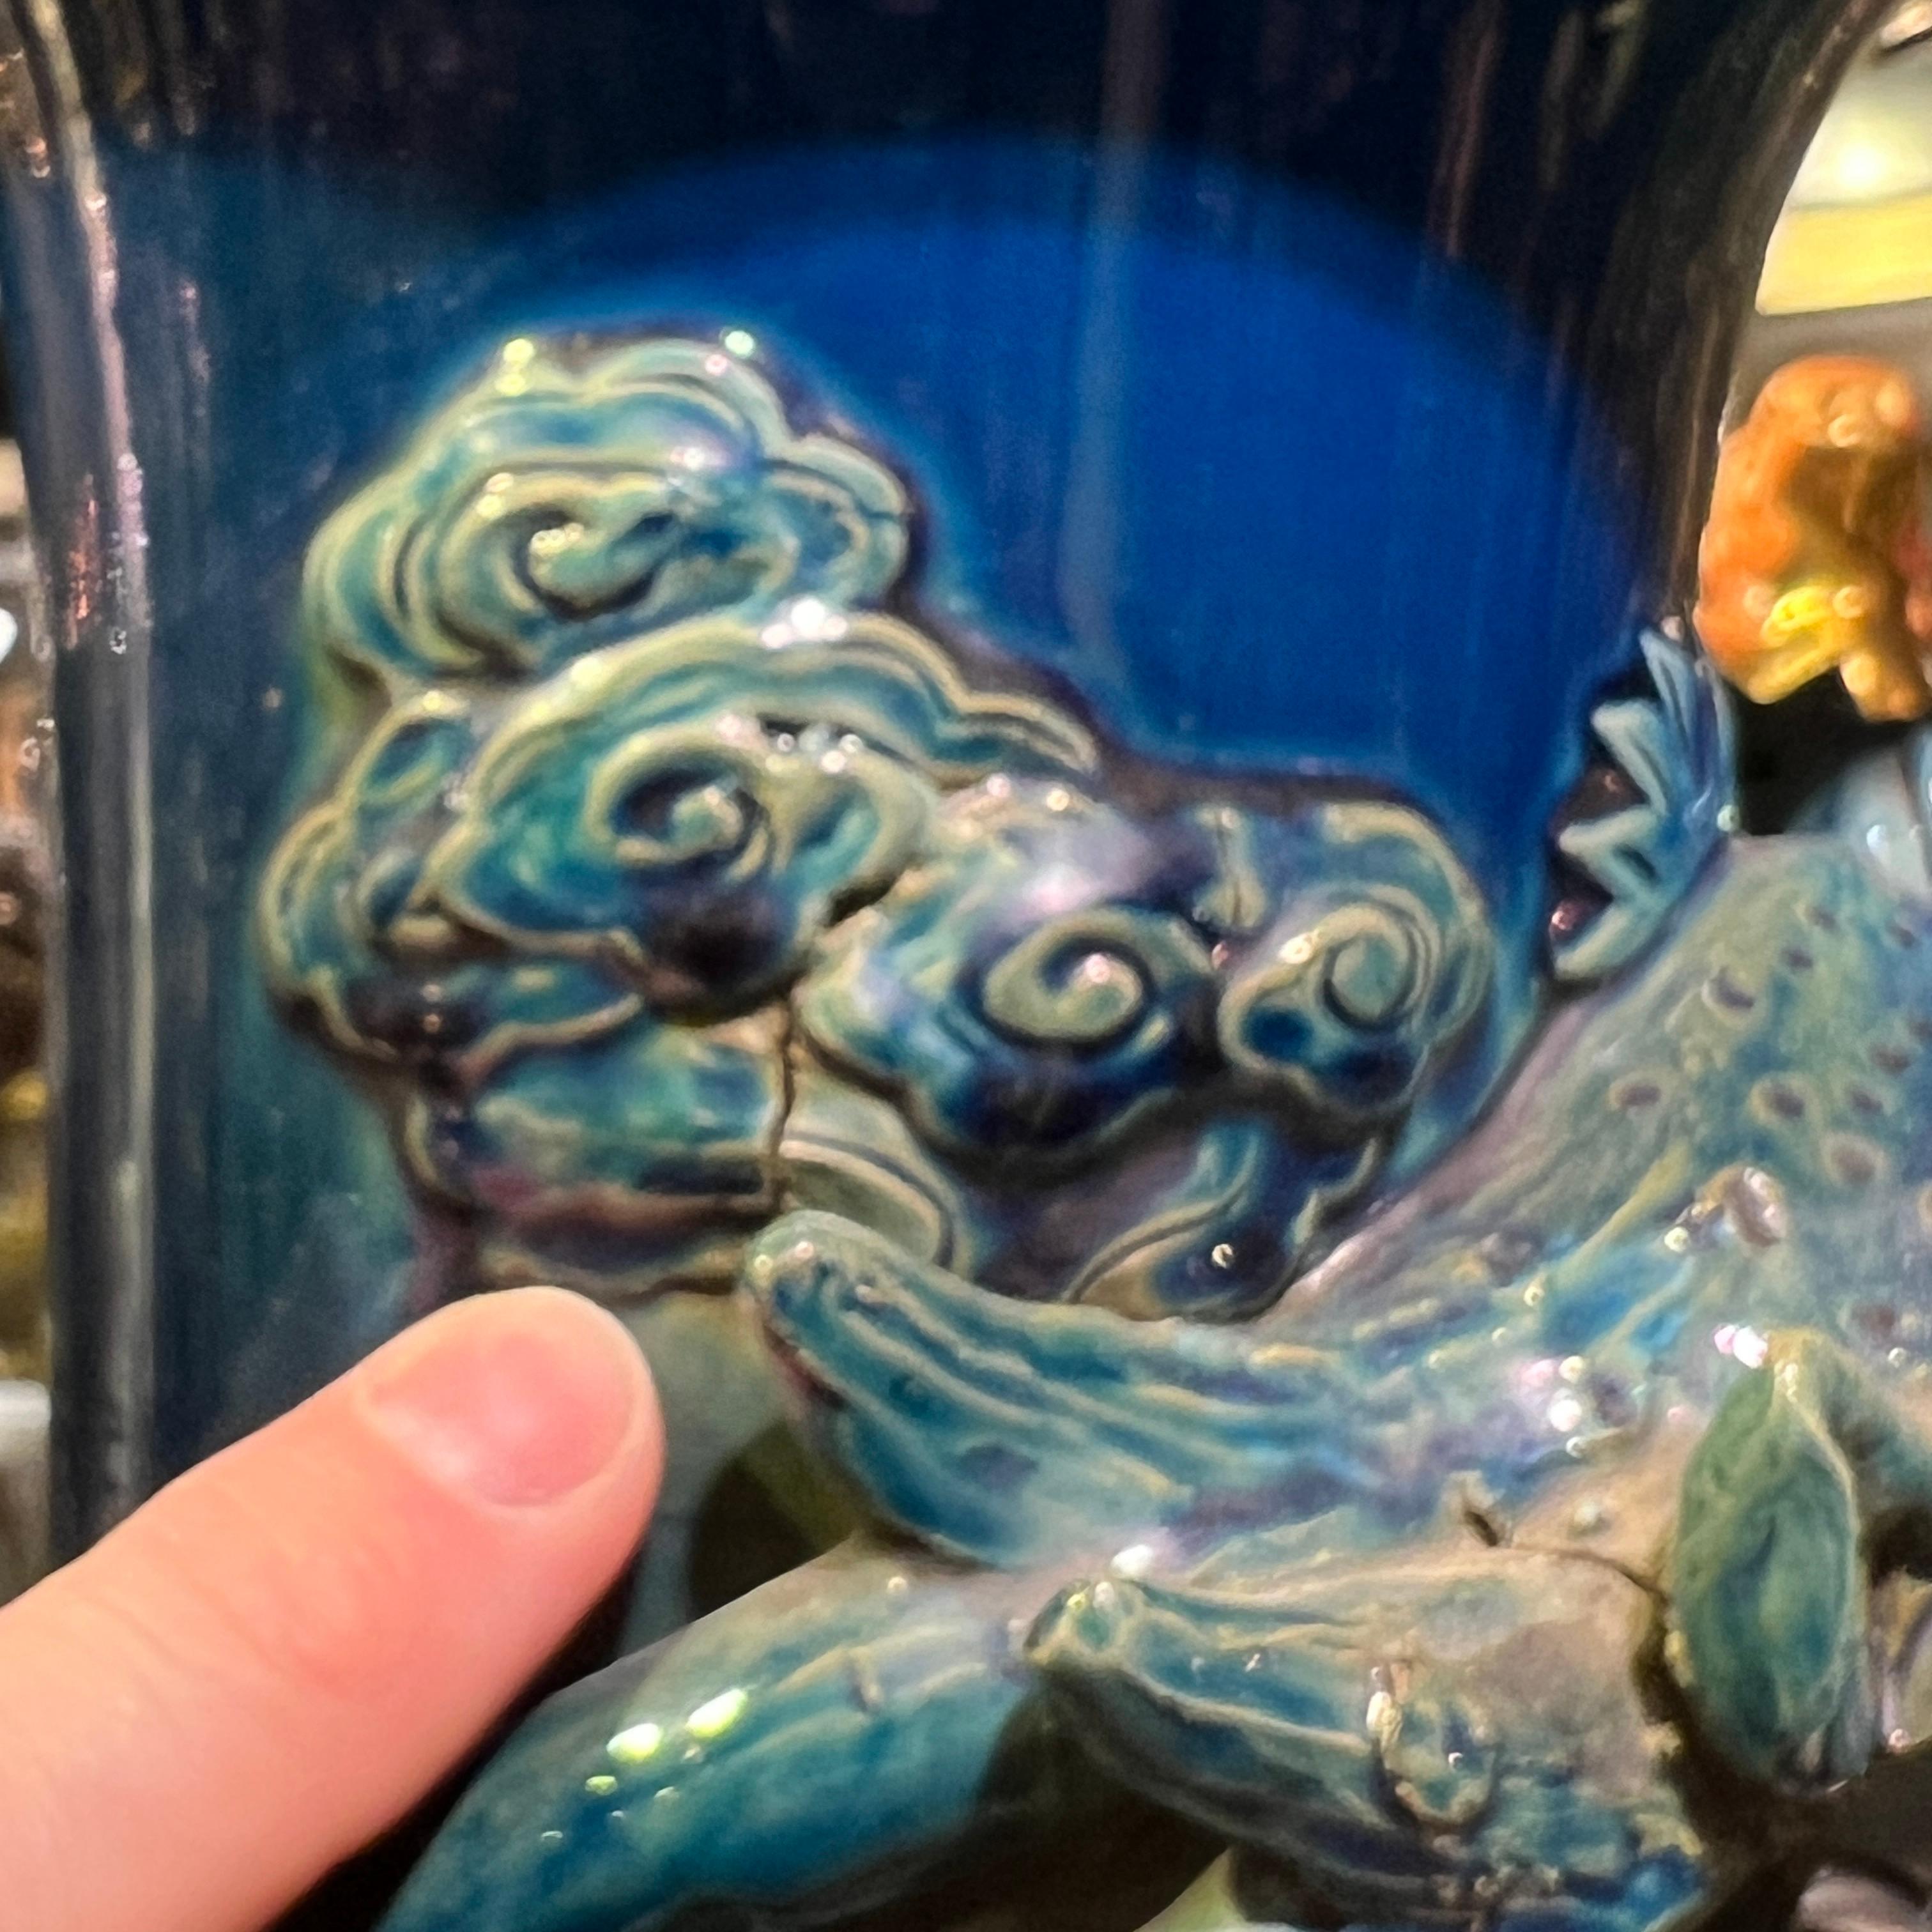 Very tall Japanese  ceramic vase with blue flambe glaze and the winding figure of a dragon.  With wooden stand.  Vase alone 30 1/2 inches tall.  Stand 6 3/4 inches tall.  Apparently unsigned.